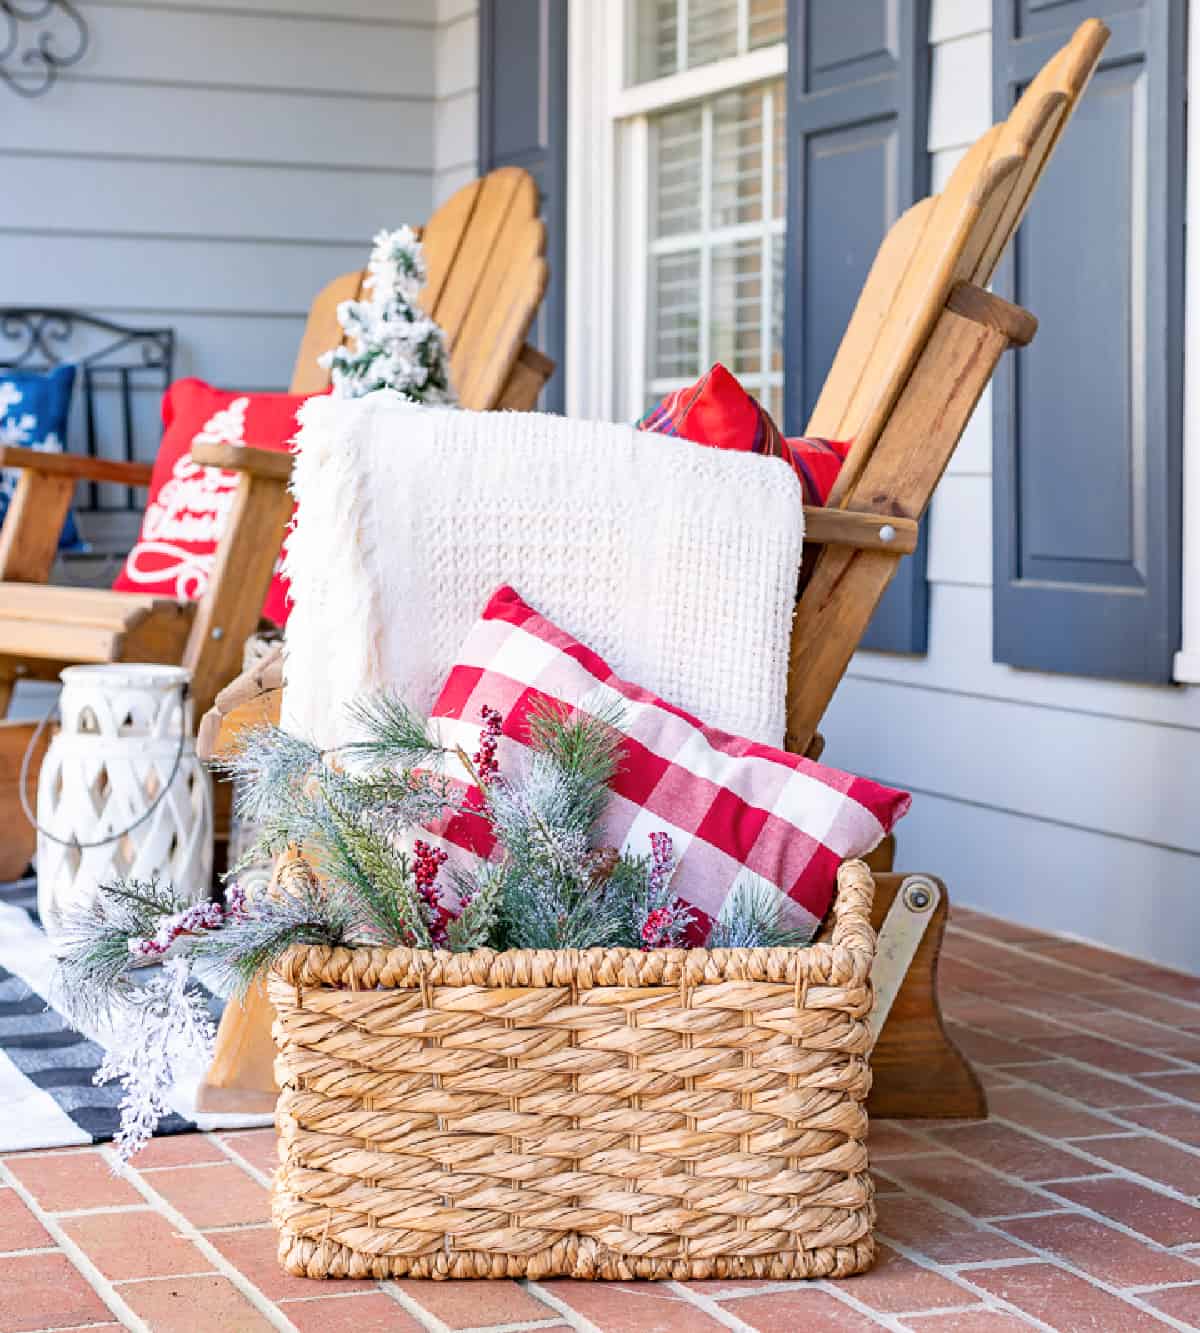 white blanket draped over the arm of a wooden outdoor chair